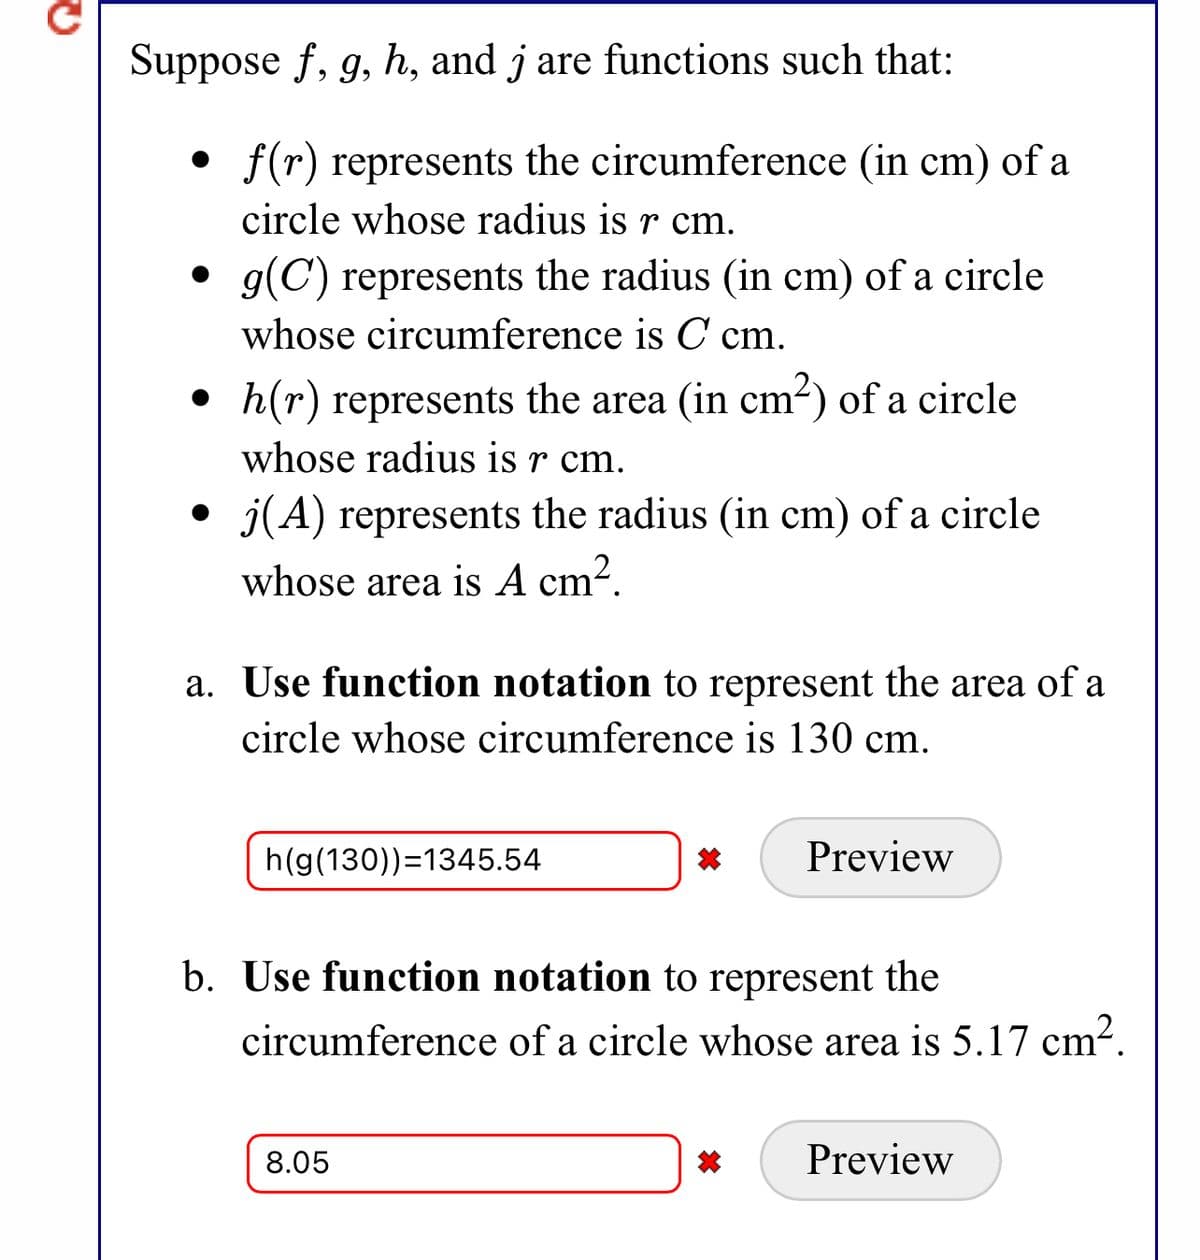 Suppose f, g, h, and j are functions such that:
f(r) represents the circumference (in cm) of a
circle whose radius is r cm.
• g(C) represents the radius (in cm) of a circle
whose circumference is C cm.
h(r) represents the area (in cm2) of a circle
whose radius is r cm.
• j(A) represents the radius (in cm) of a circle
whose area is A cm².
a. Use function notation to represent the area of a
circle whose circumference is 130 cm.
h(g(130))=1345.54
Preview
b. Use function notation to represent the
circumference of a circle whose area is 5.17 cm2.
8.05
Preview
